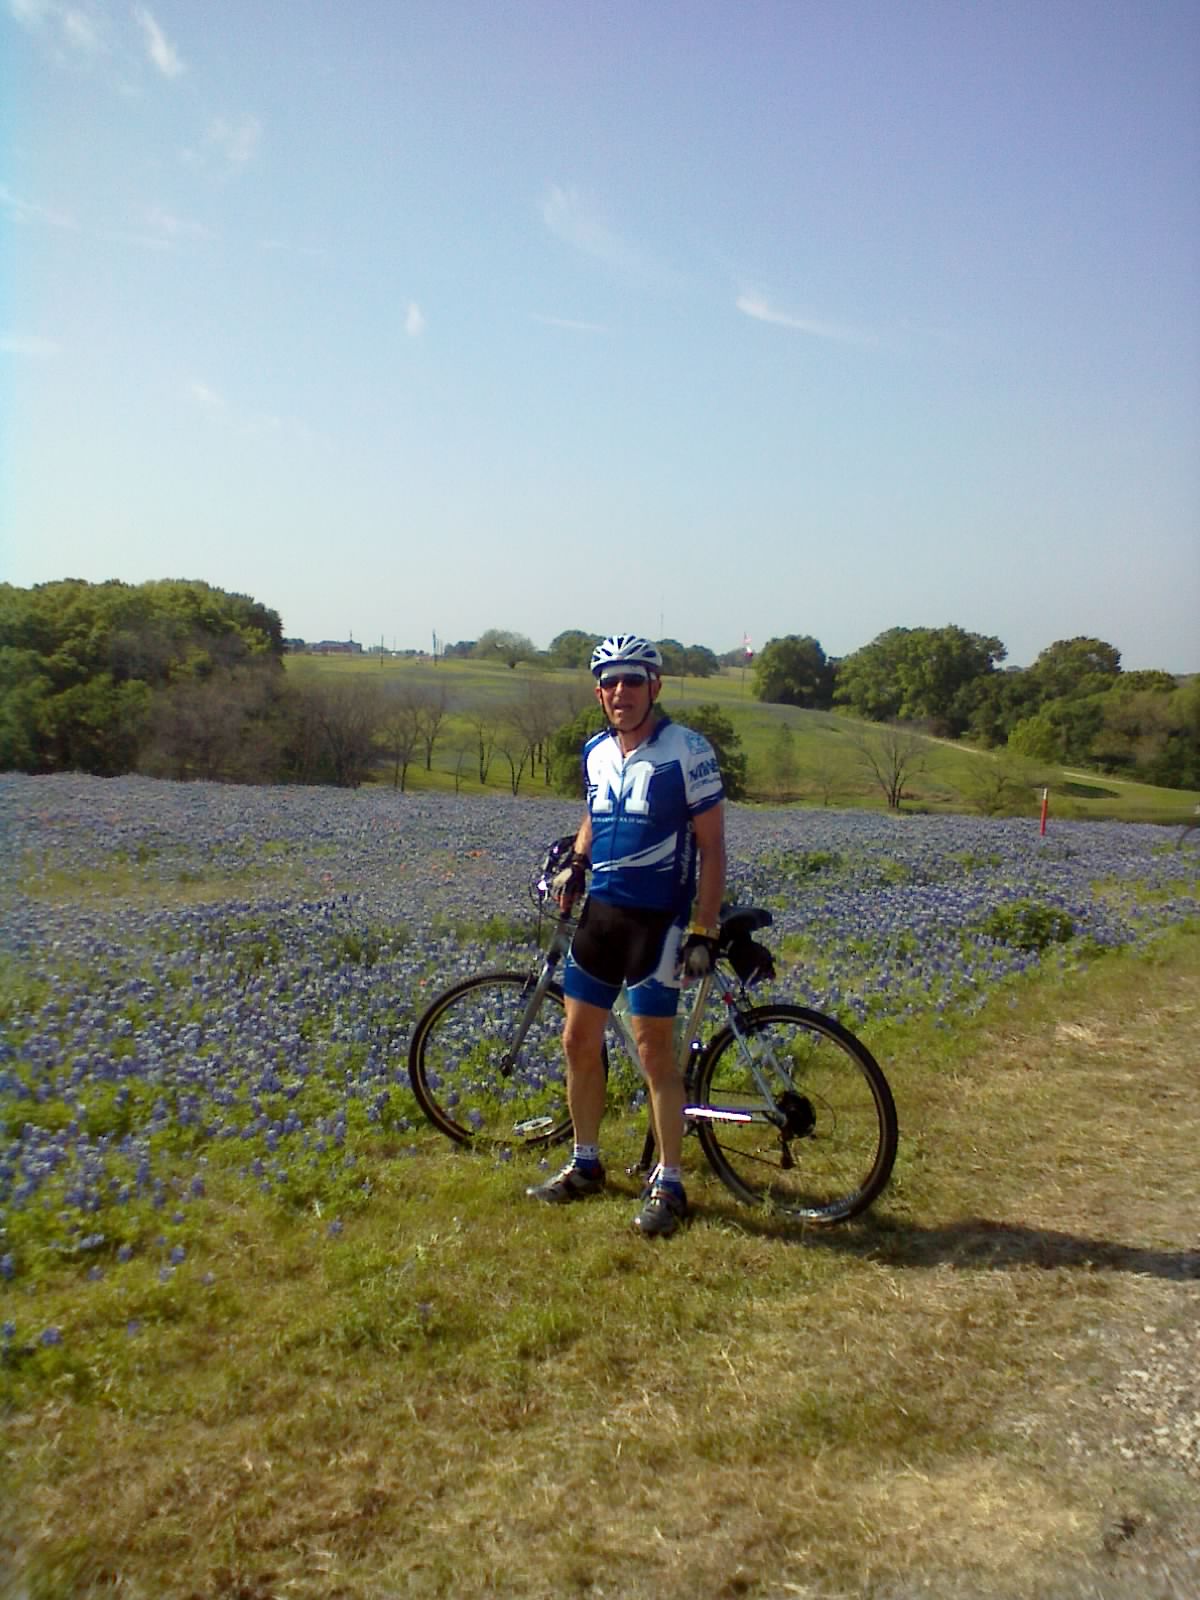 The Wheelbrothers Christmas contest - share your favorite 2011 Texas cycling picture/story